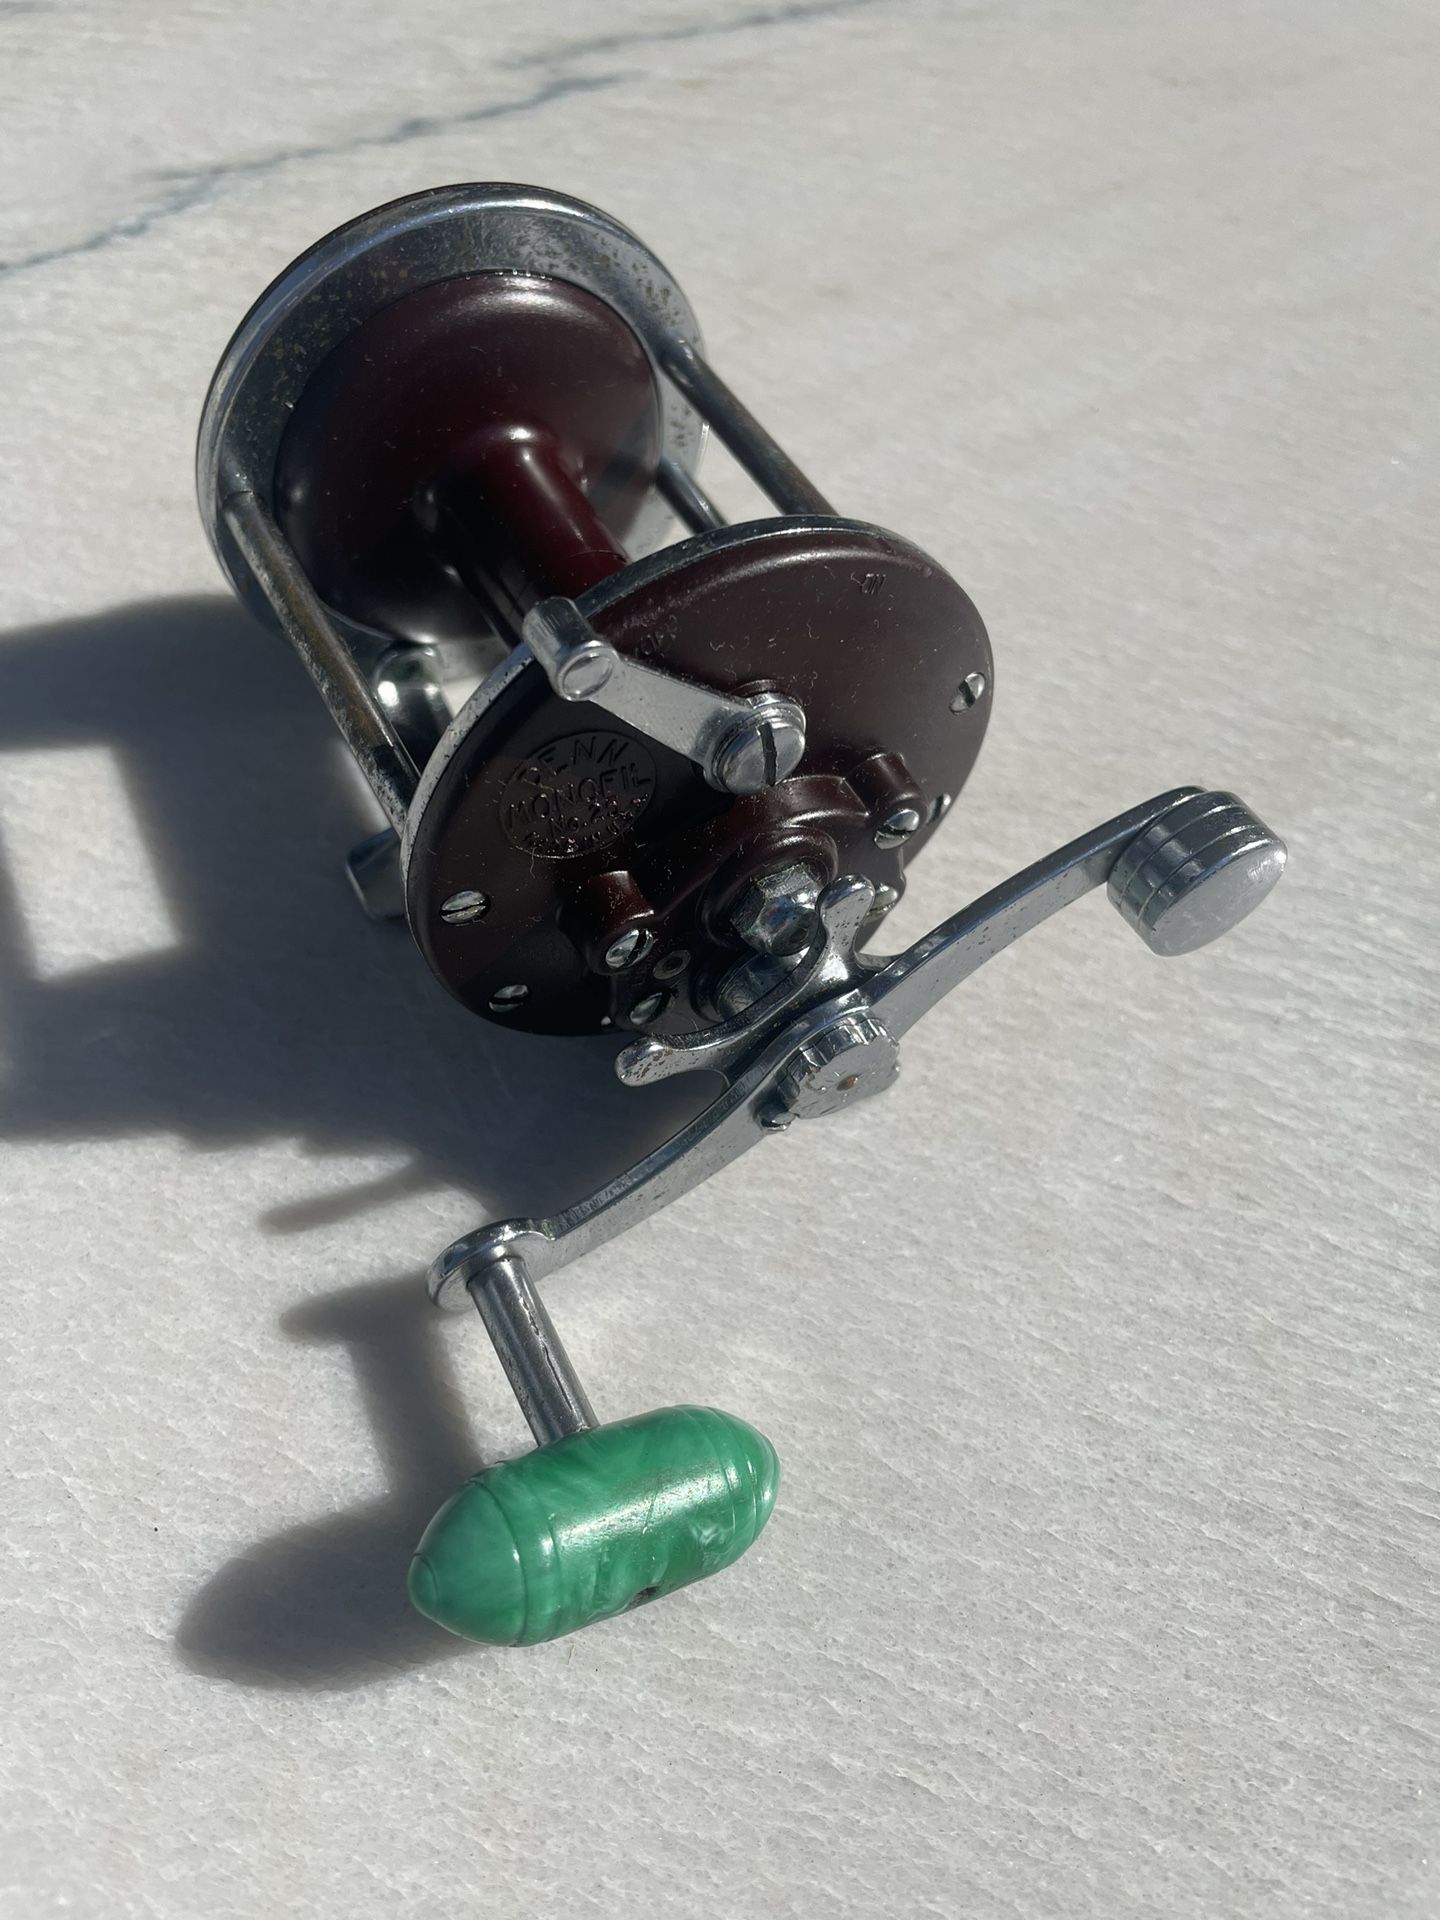 Penn Monofil No. 25 Fishing Reel - Cleaned And Serviced